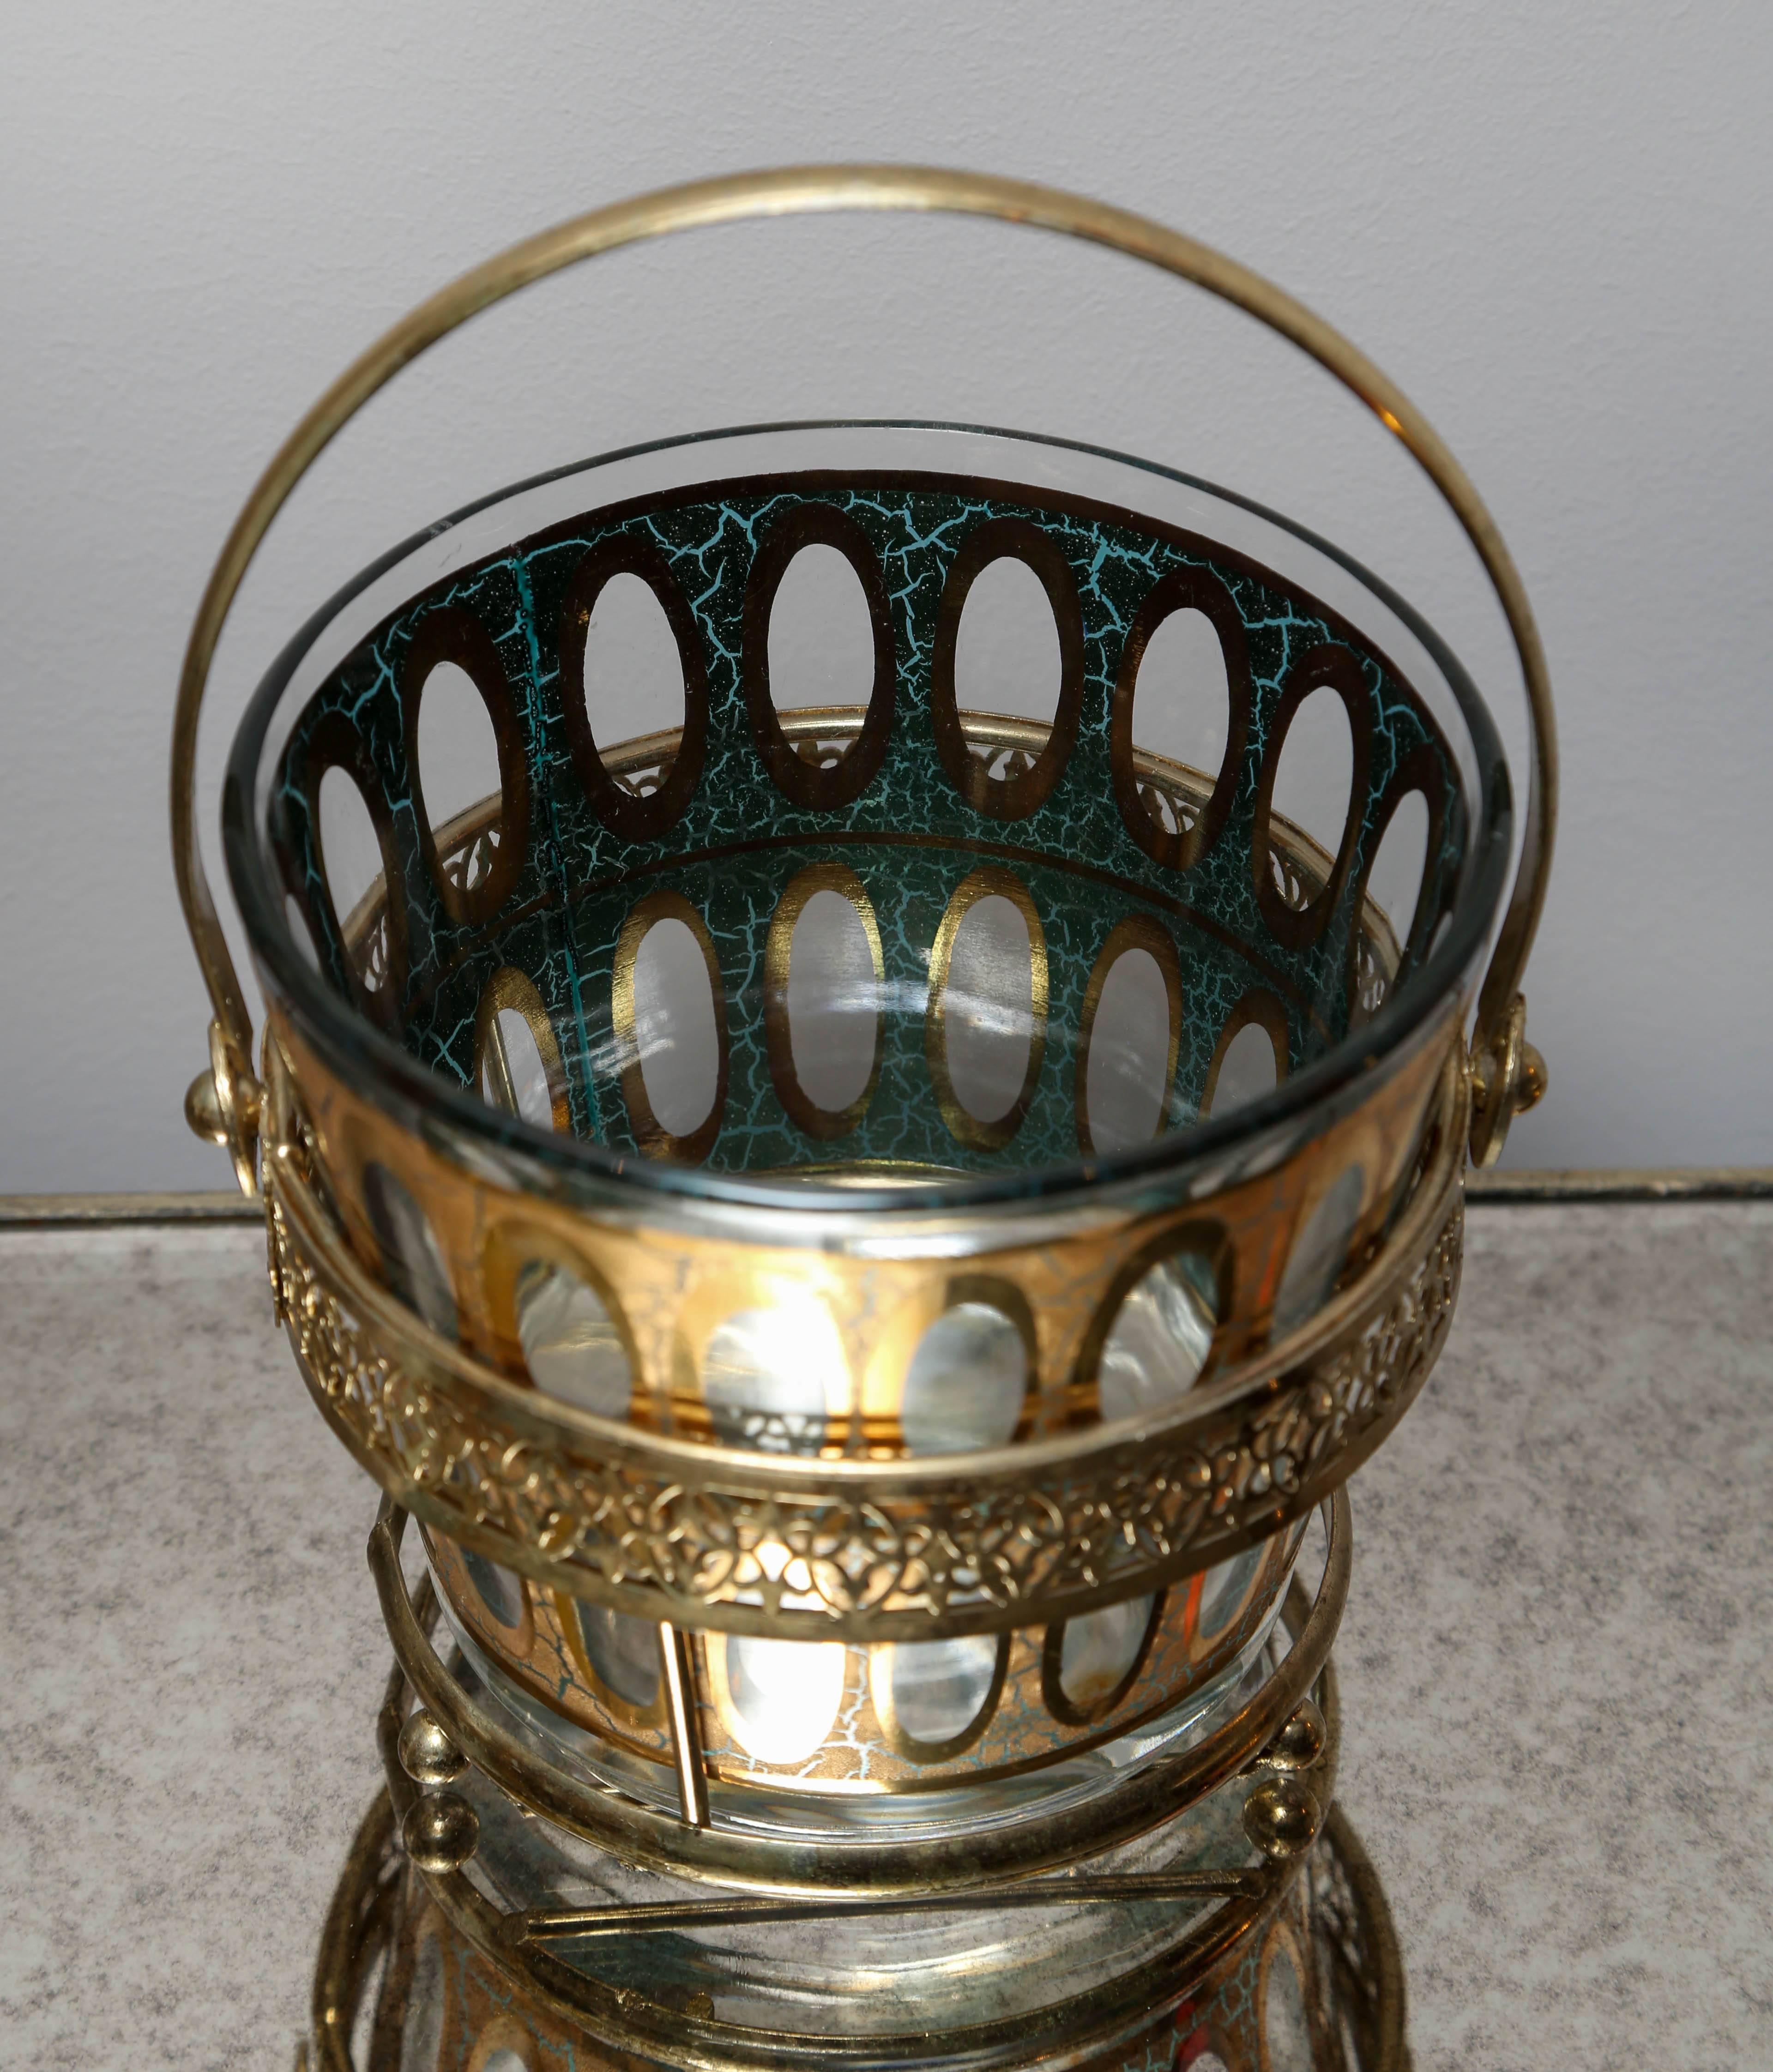 European  SALE! SALE!SALE! COCKTAIL SET with  Ice Bucket and Eight Tumblers, Rich Gilt  For Sale